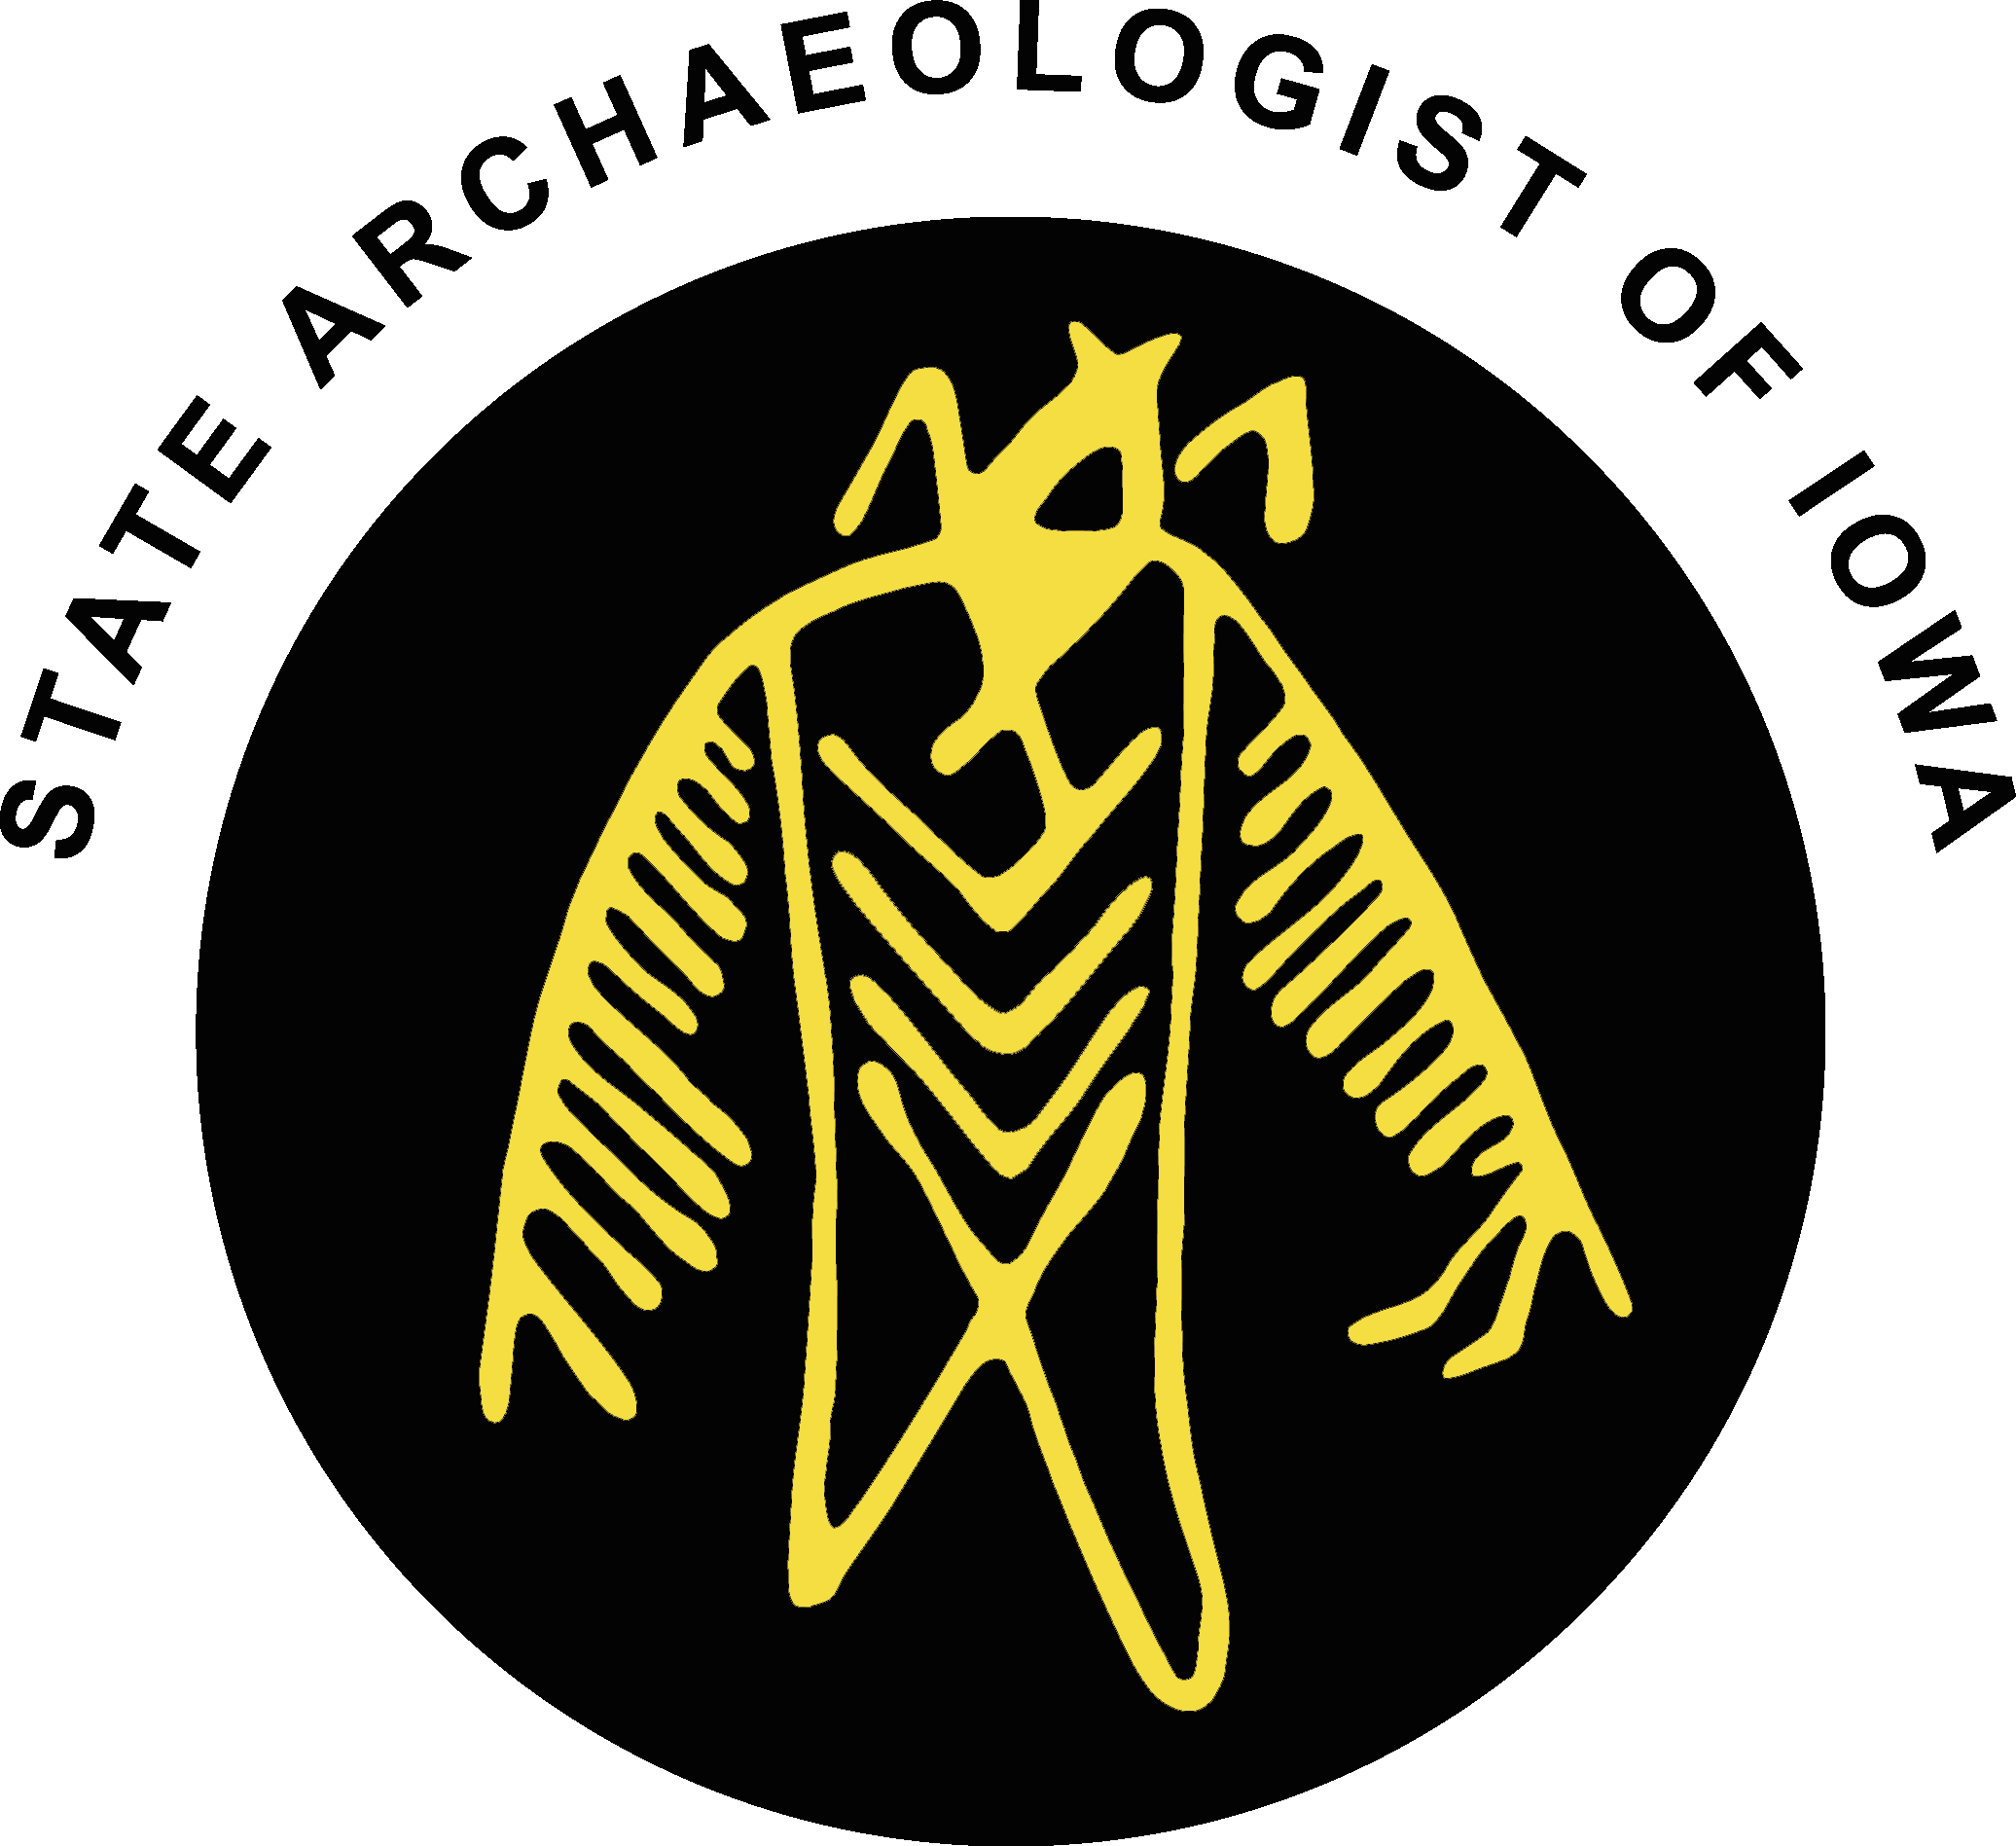 Office of the State Archaeologist logo